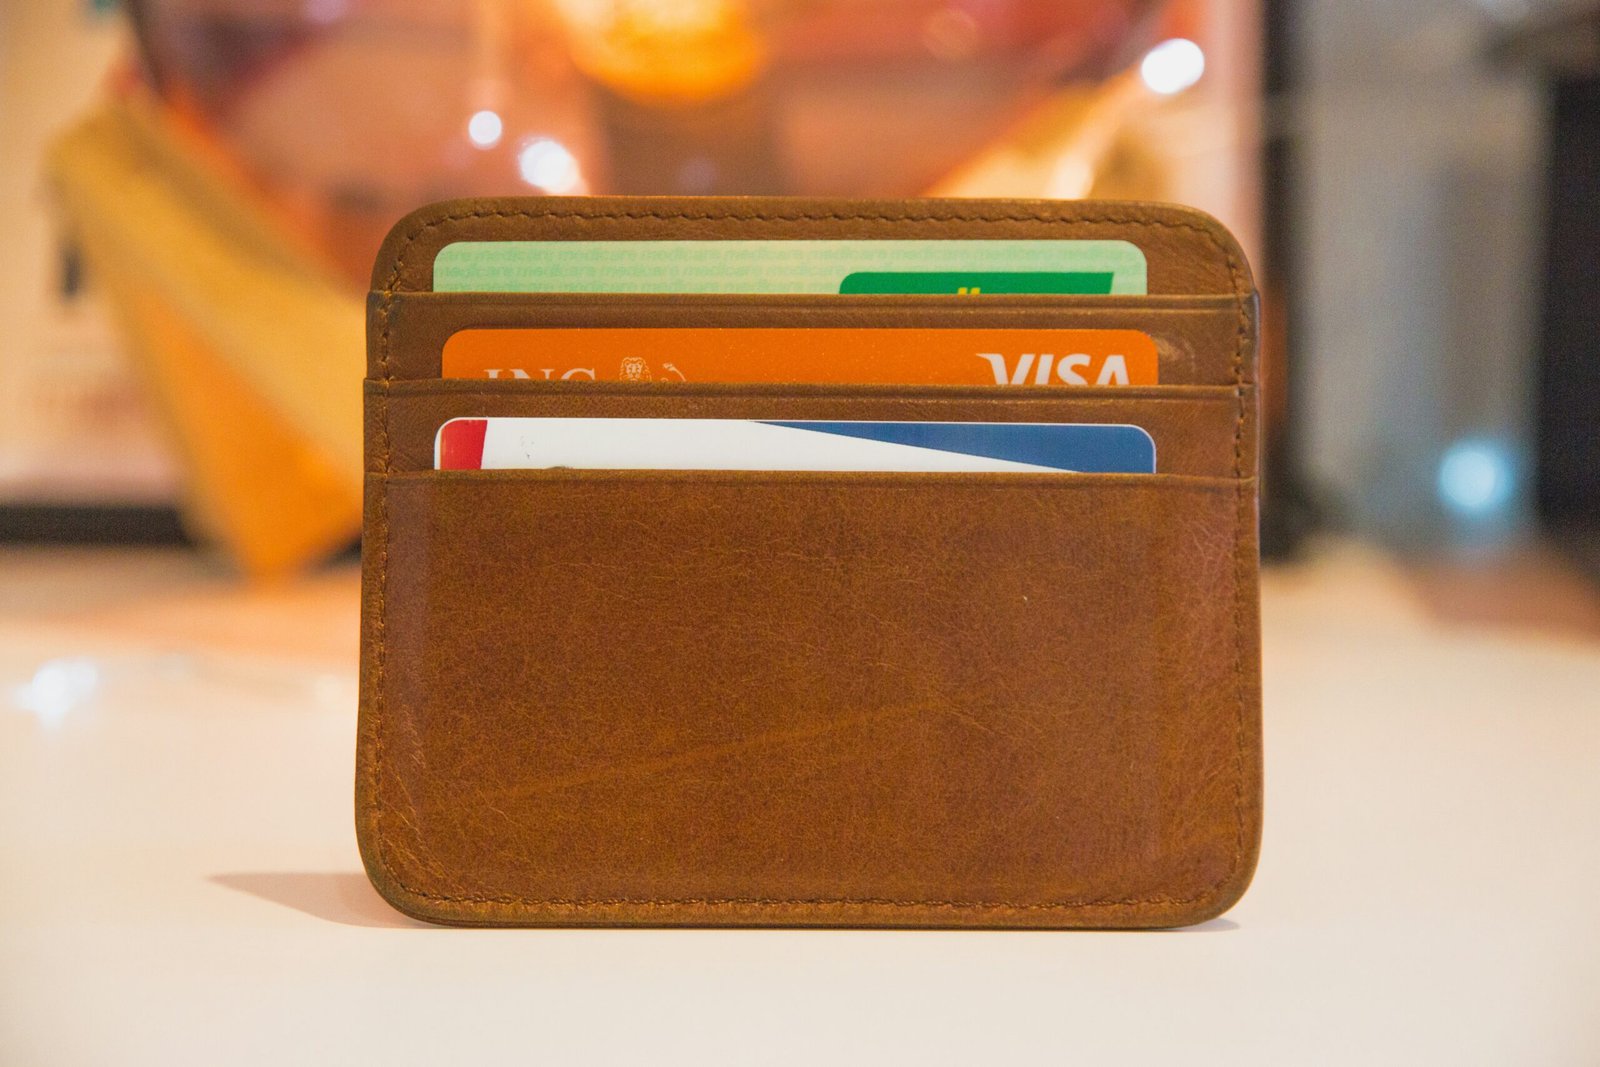 Why Size Matters: The Importance of Size in Wallet Choice